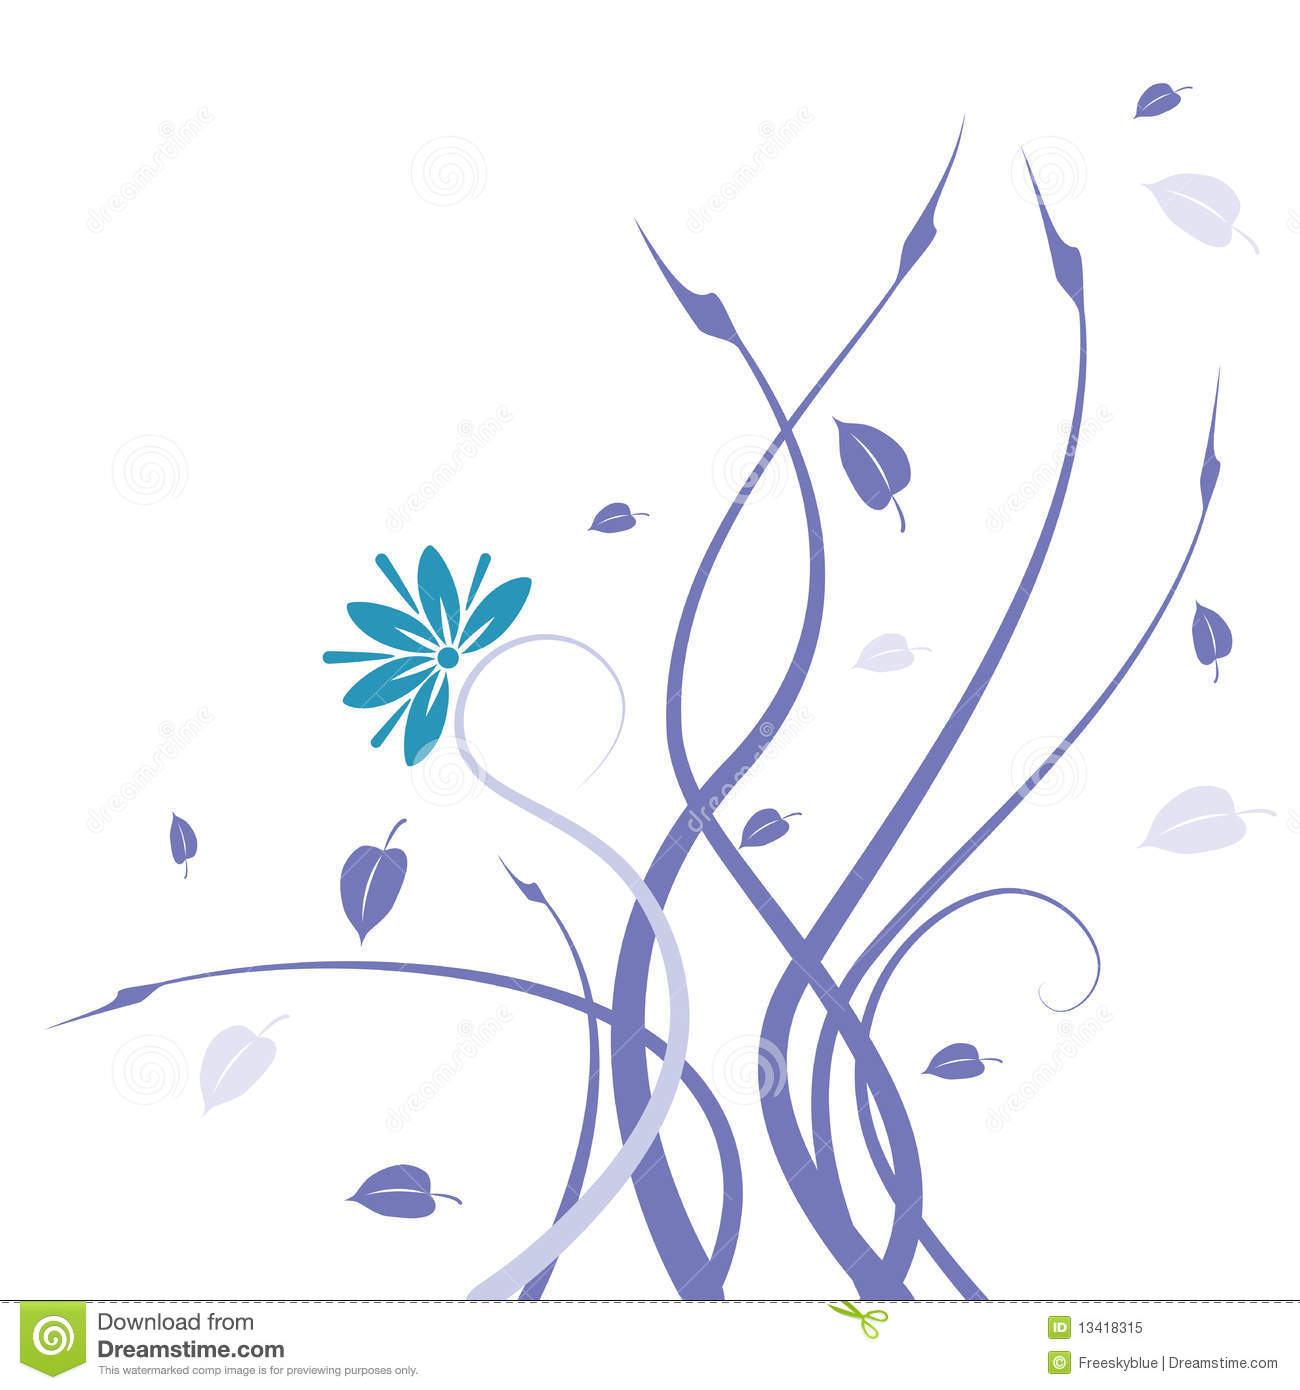 Blue Wild Flower And Vines Pattern Royalty Free Stock Photo   Image